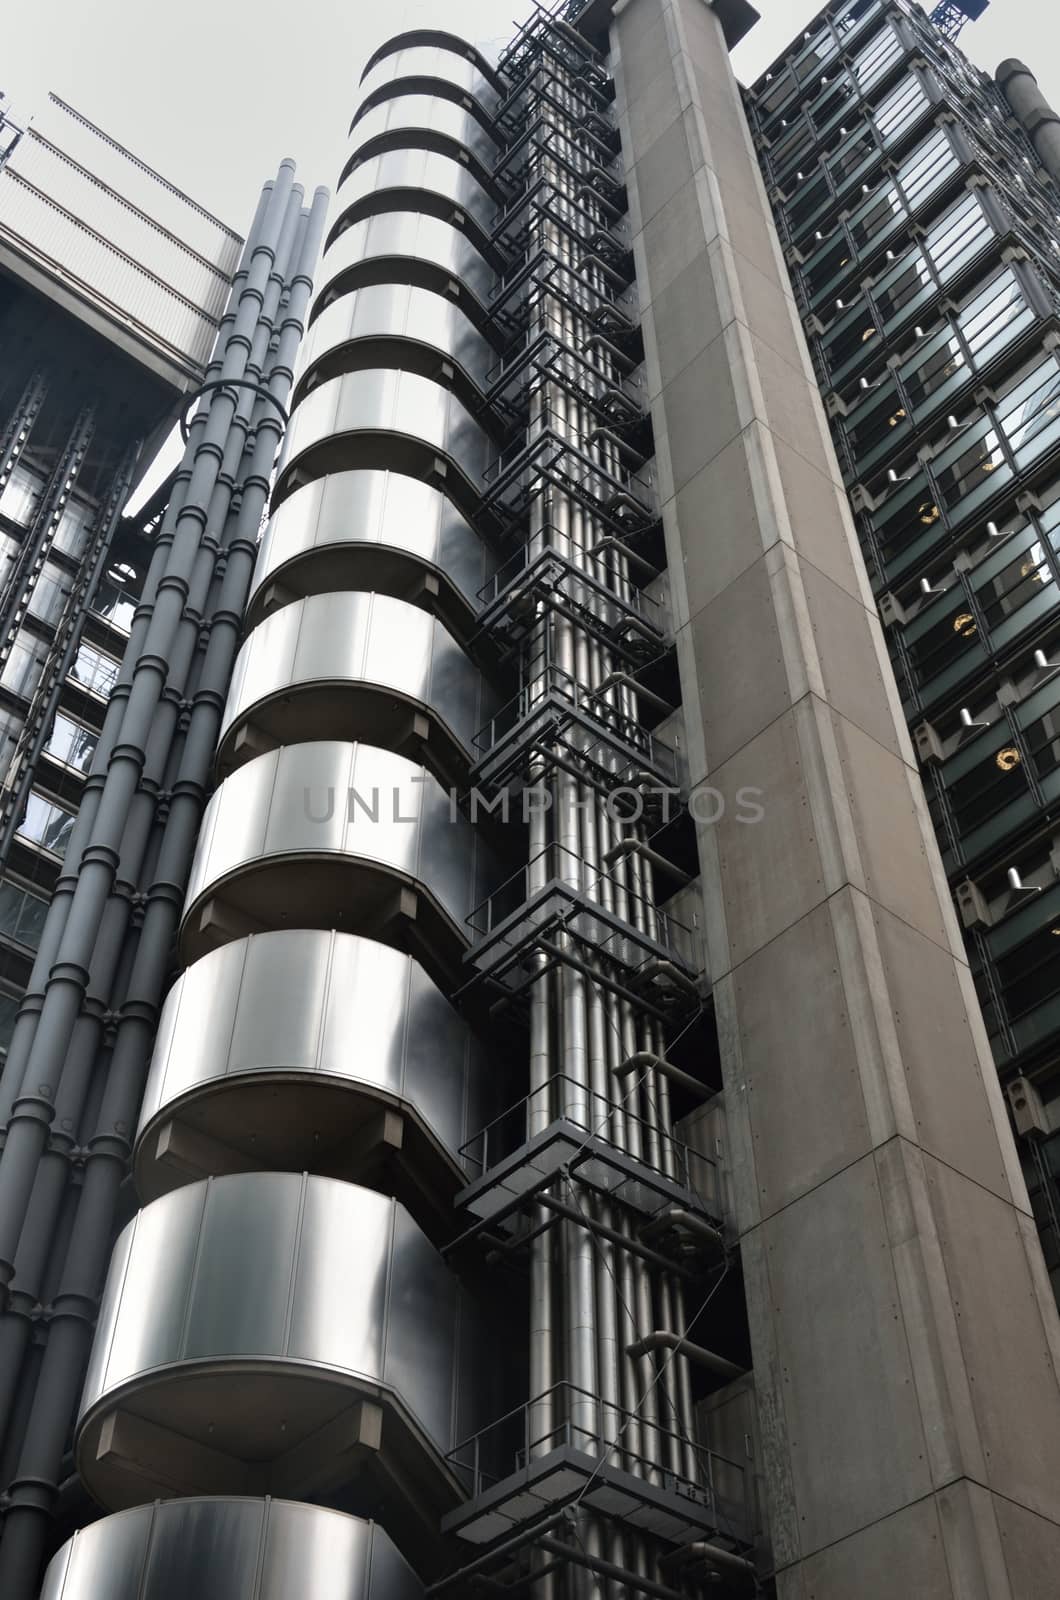 Lloyds building tower